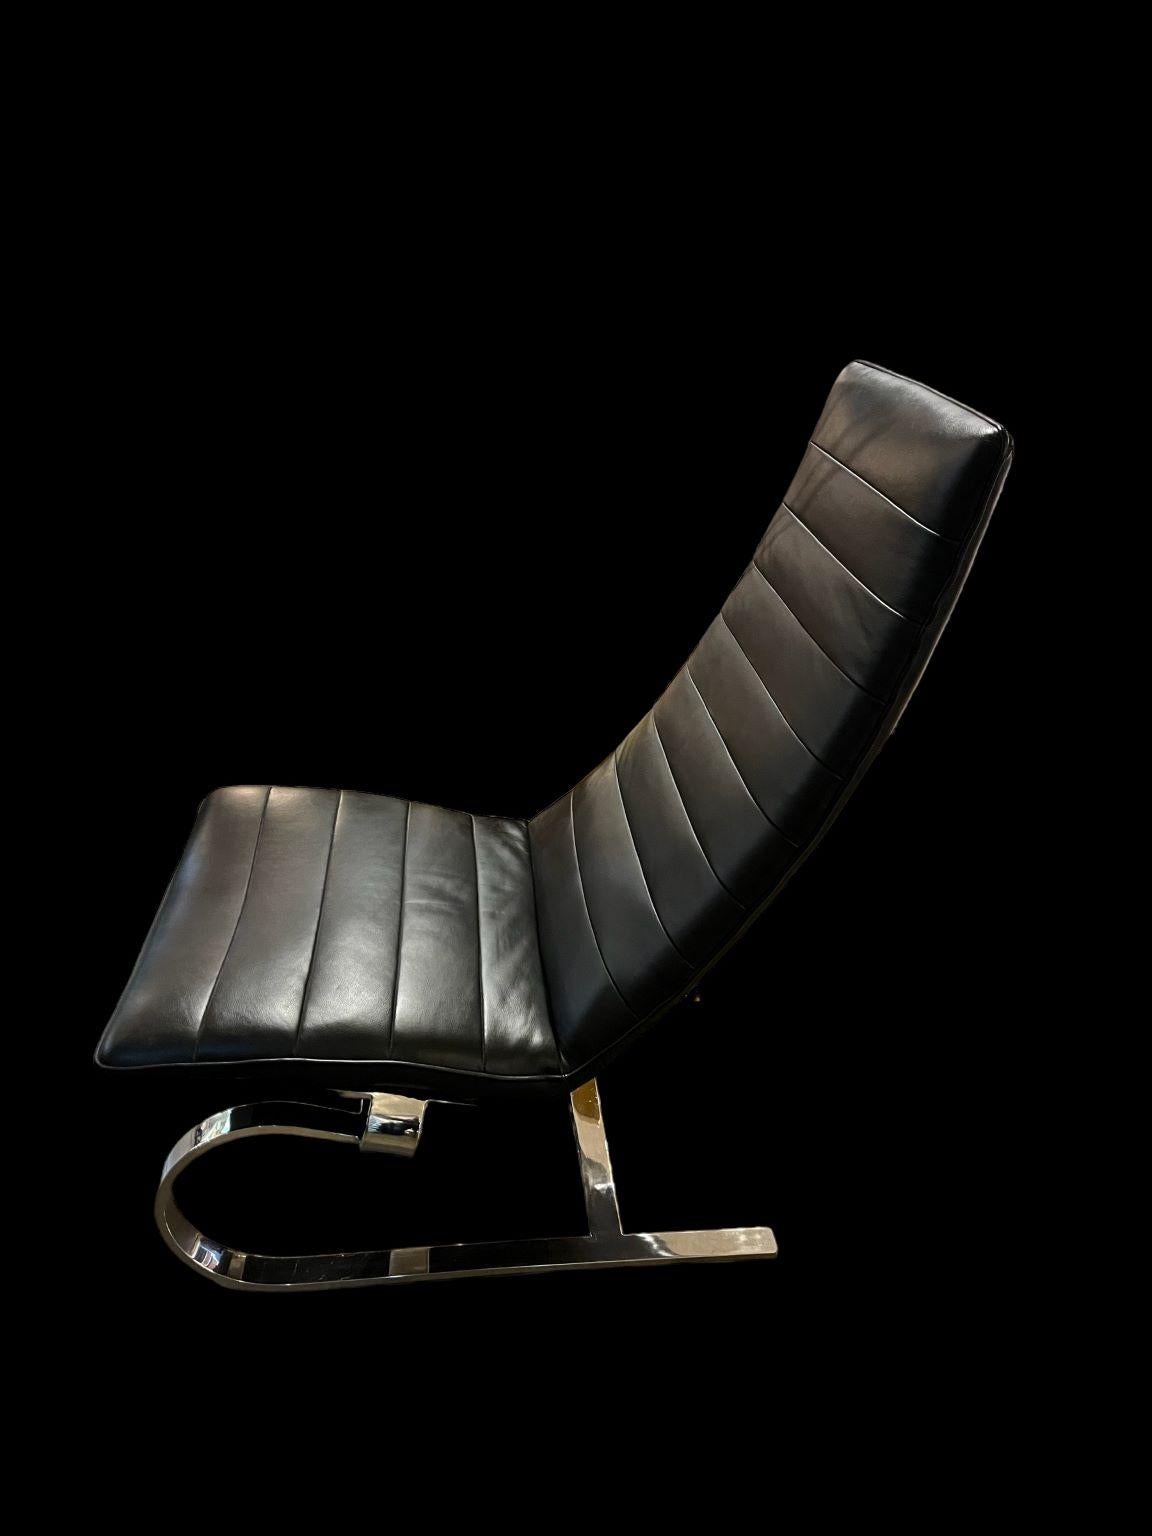 Polished Chrome And Black Leather Modernist Chair In The Style Of Poul Kjaerholm